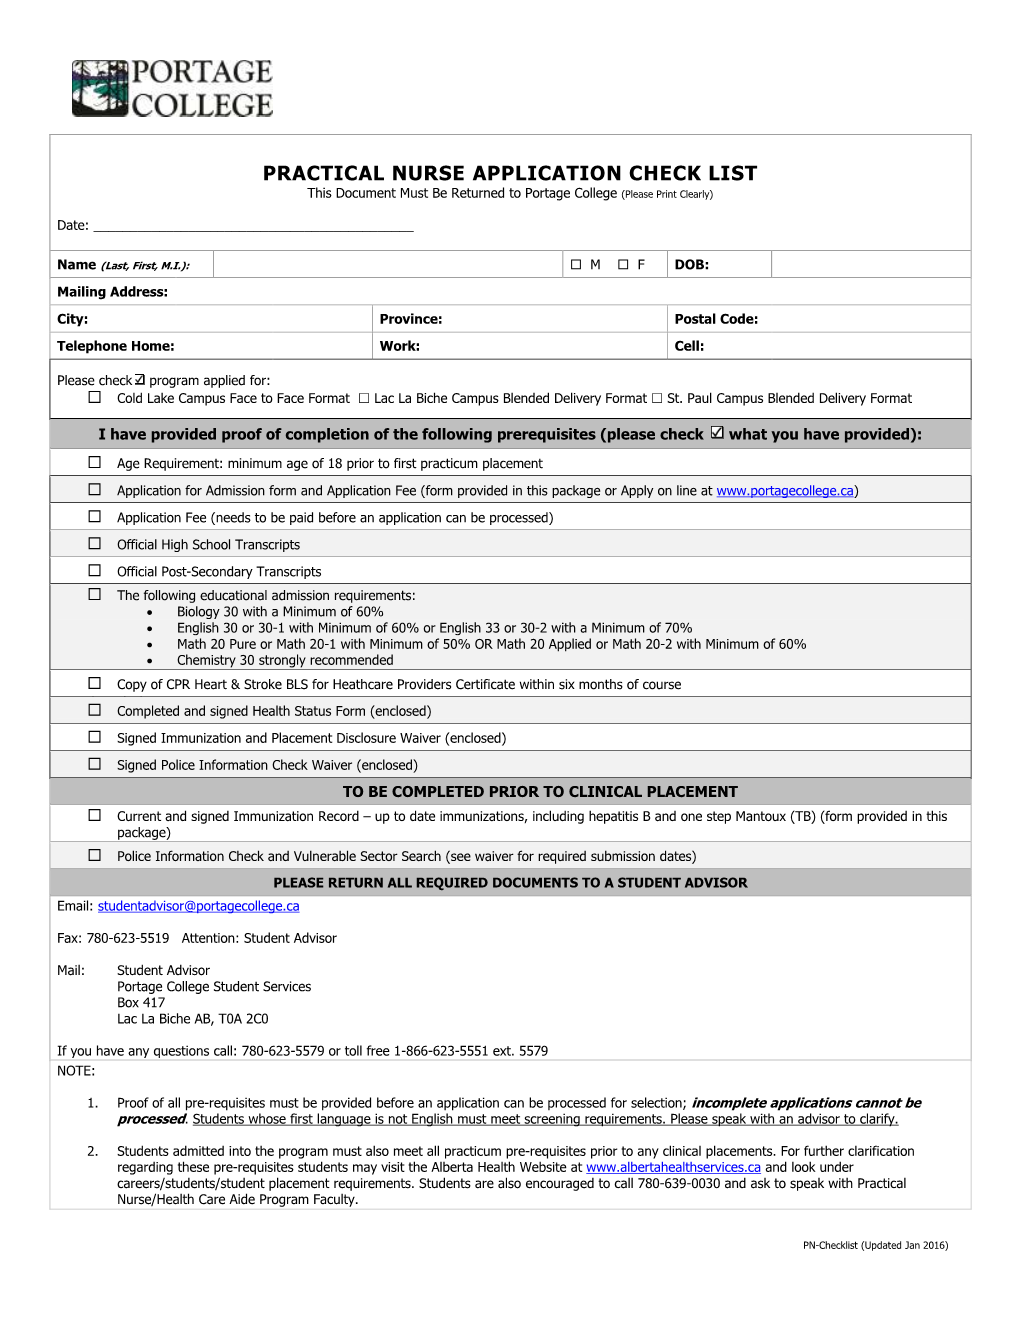 PRACTICAL NURSE APPLICATION CHECK LIST This Document Must Be Returned to Portage College (Please Print Clearly)